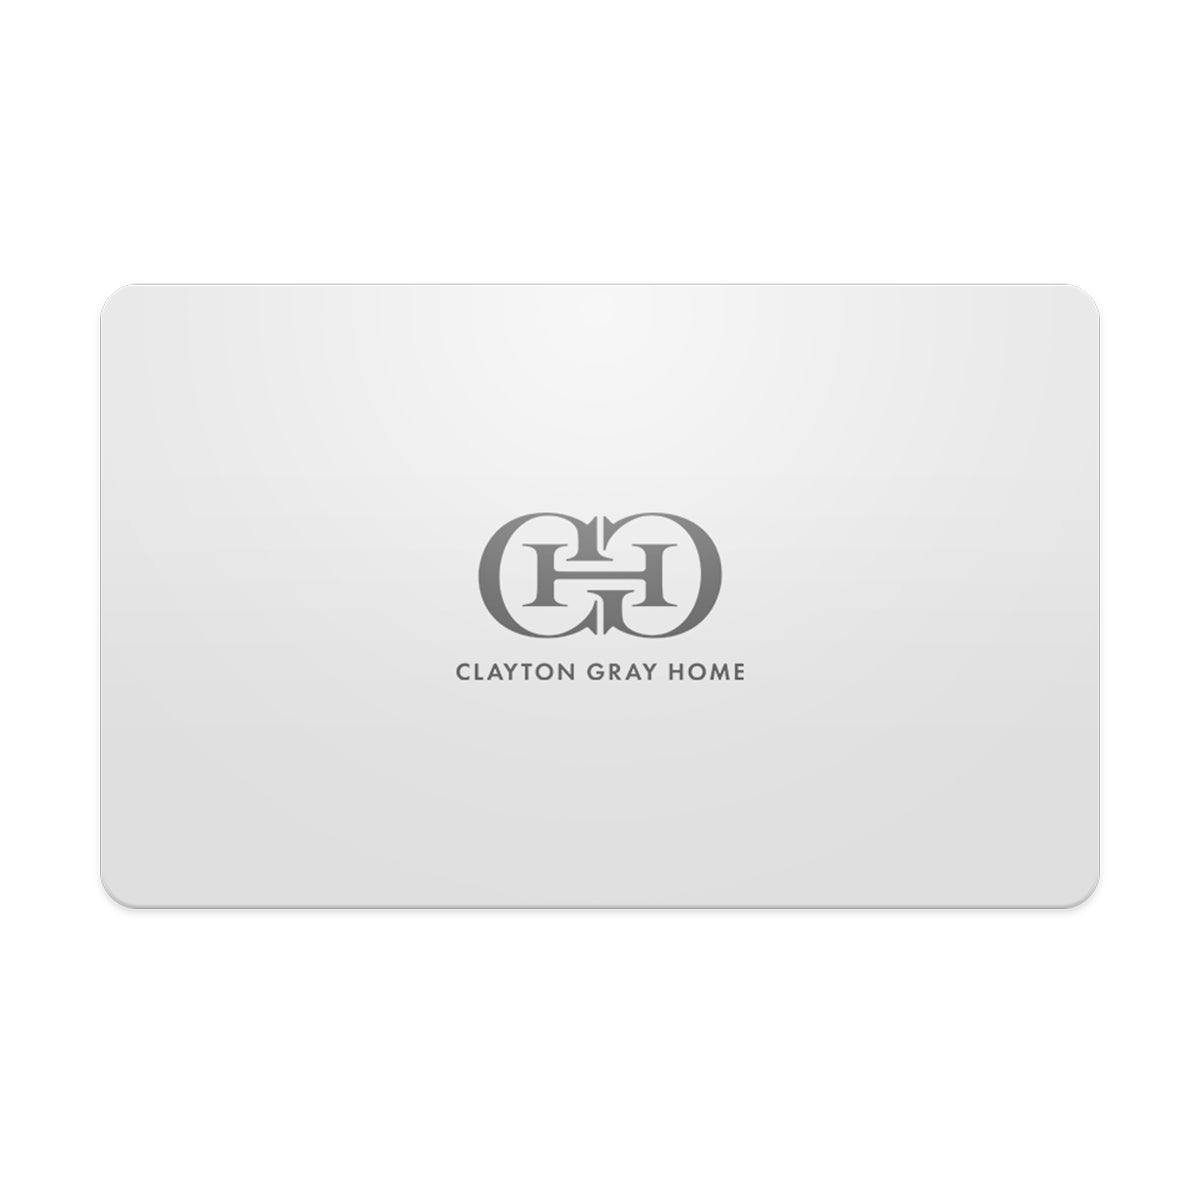 Clayton Gray Home Gift Card